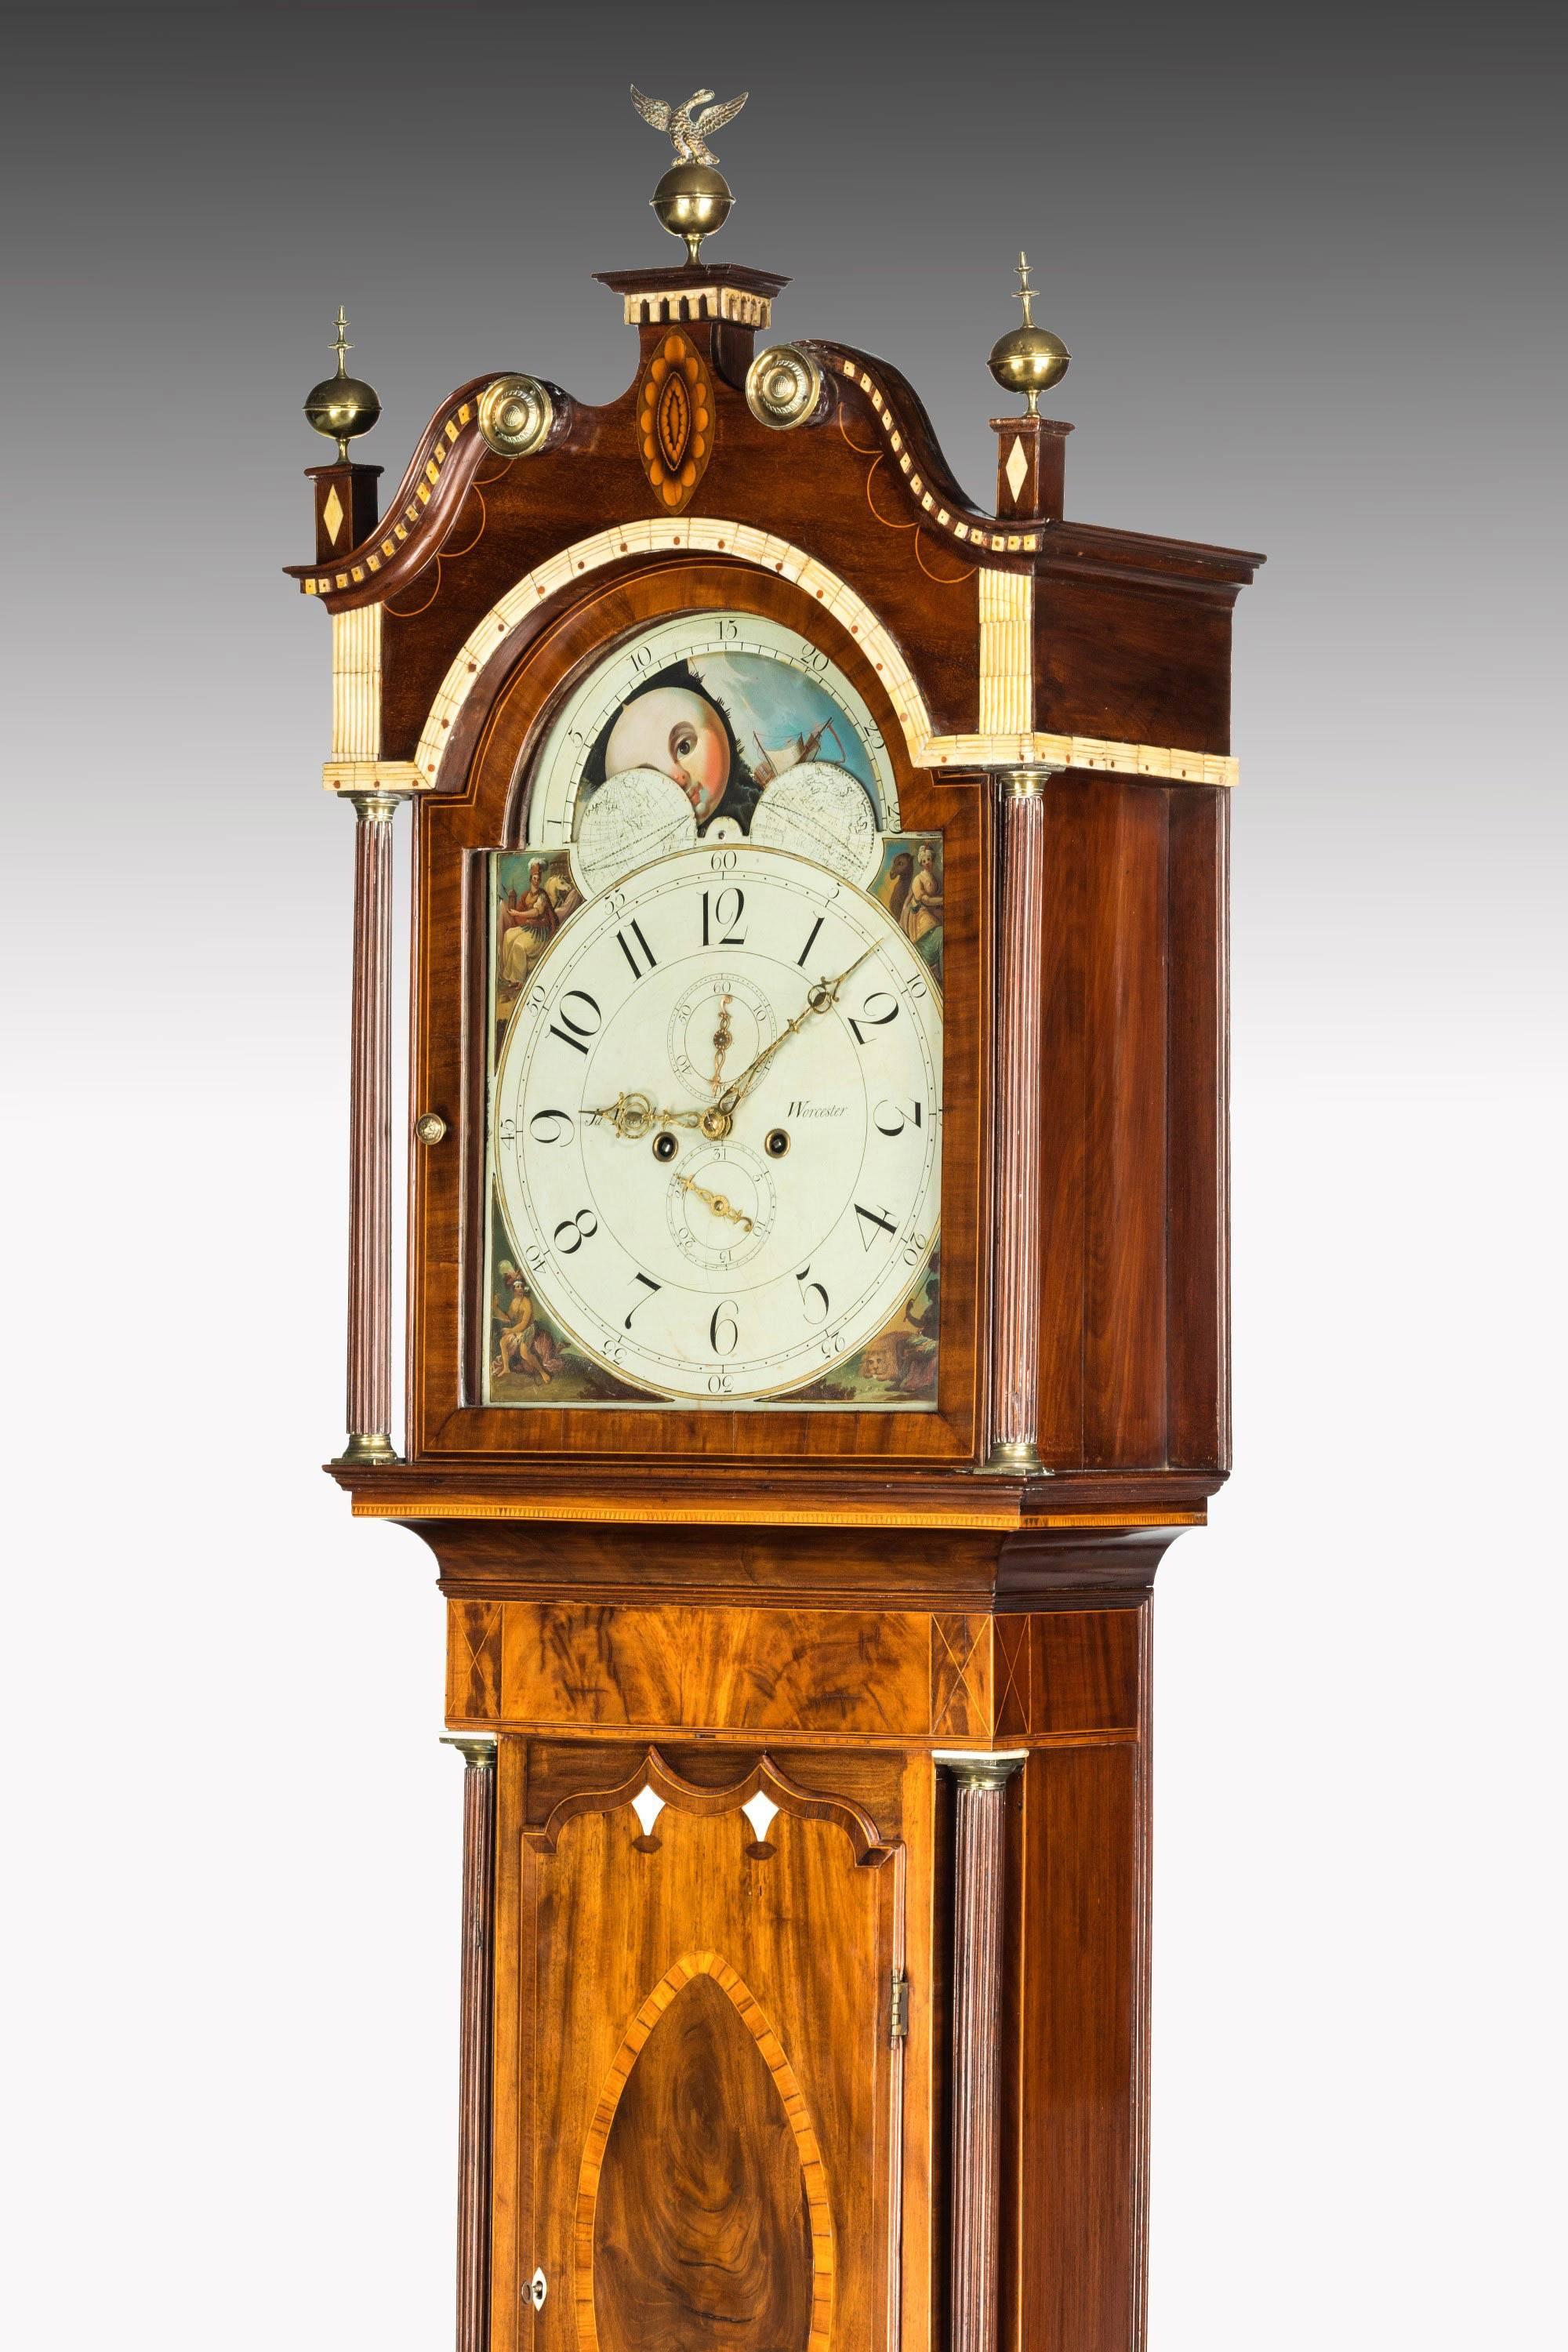 A grand Regency grandfather clock by James Powell of Worcester, watchmaker to the Prince of Wales.

Regency period mahogany crossbanded and ivory and bone inlaid longcase clock by James Powell, Worcester, early 19th century, the hood with brass